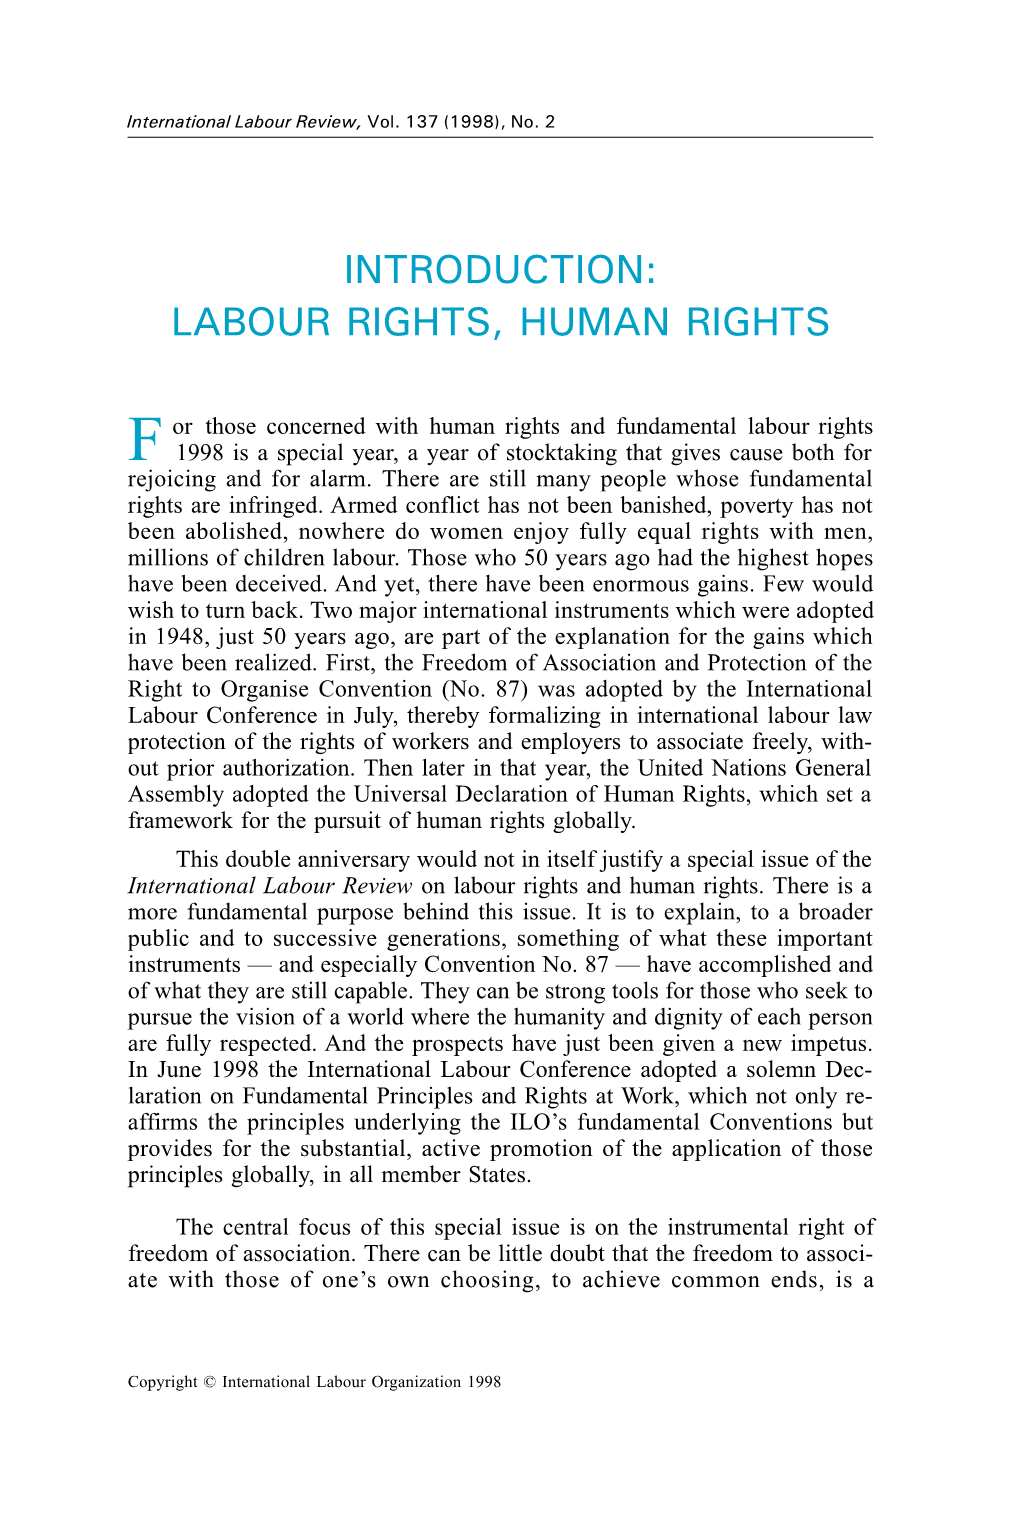 Labour Rights, Human Rights